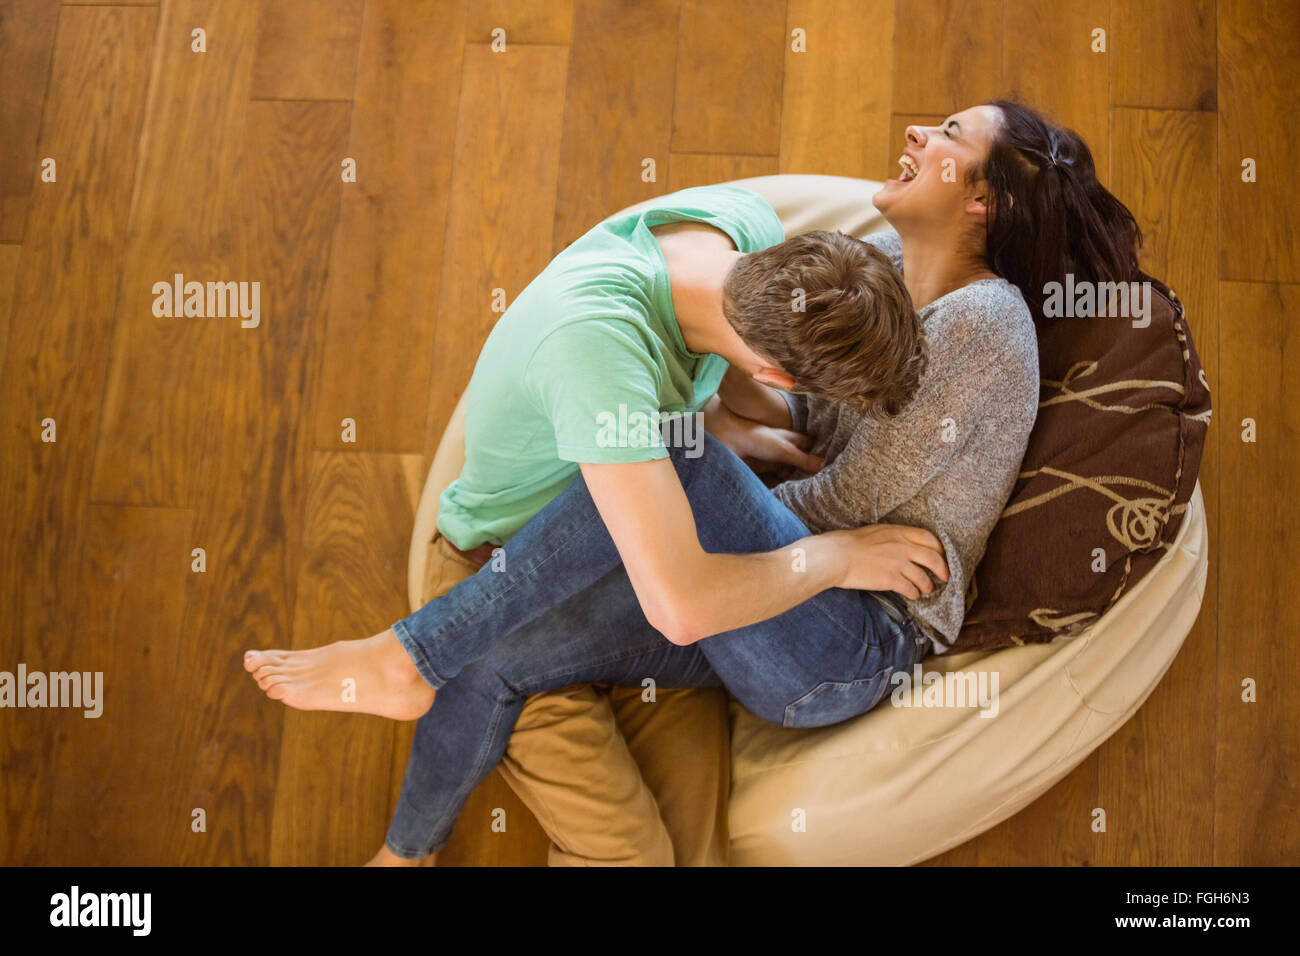 Cute couple laughing together on beanbag Stock Photo